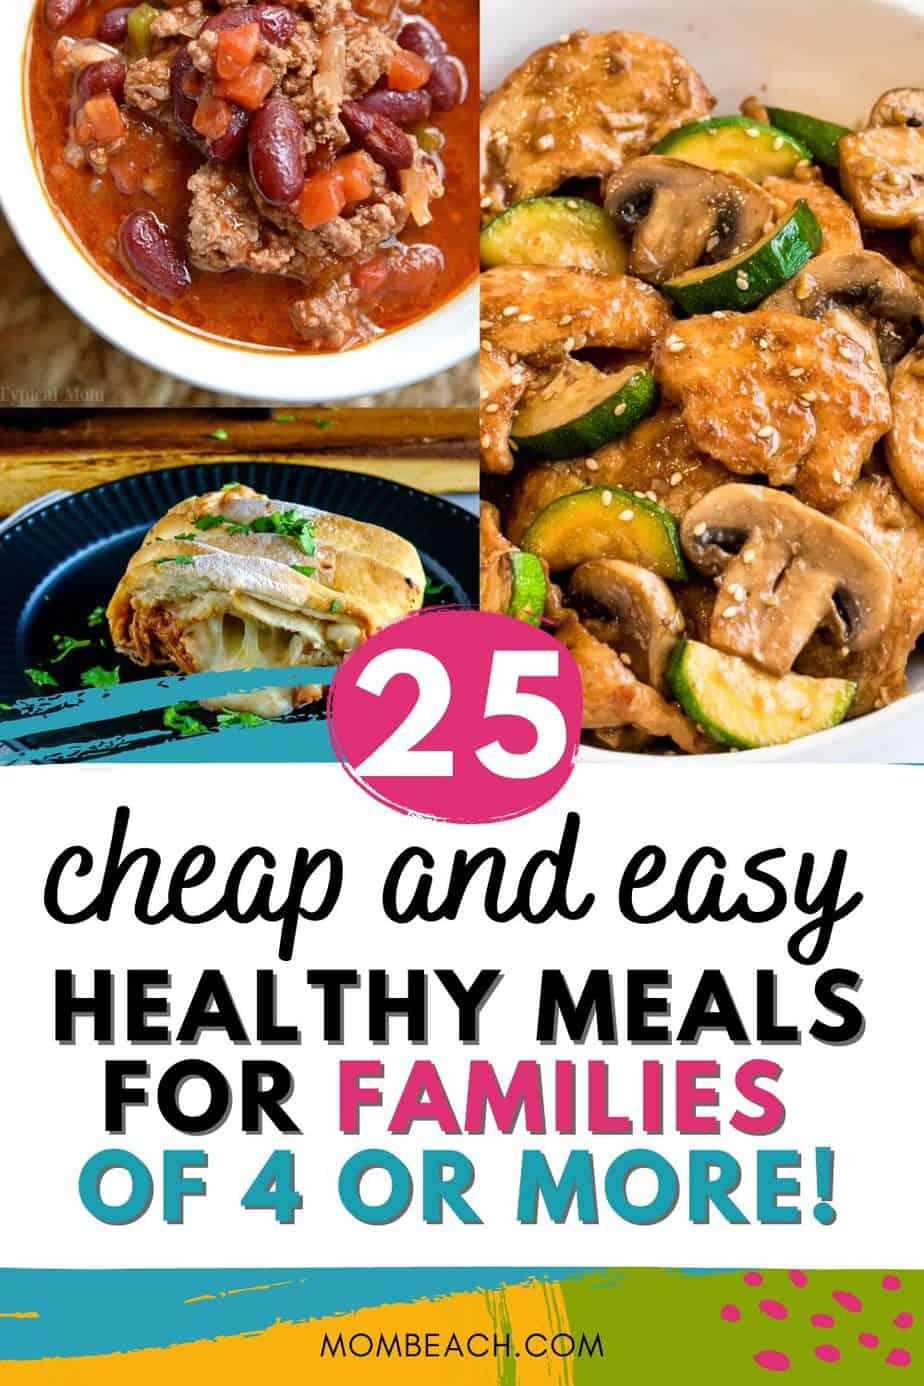 25 Cheap and Easy Healthy Meals for Families of 4 or more!